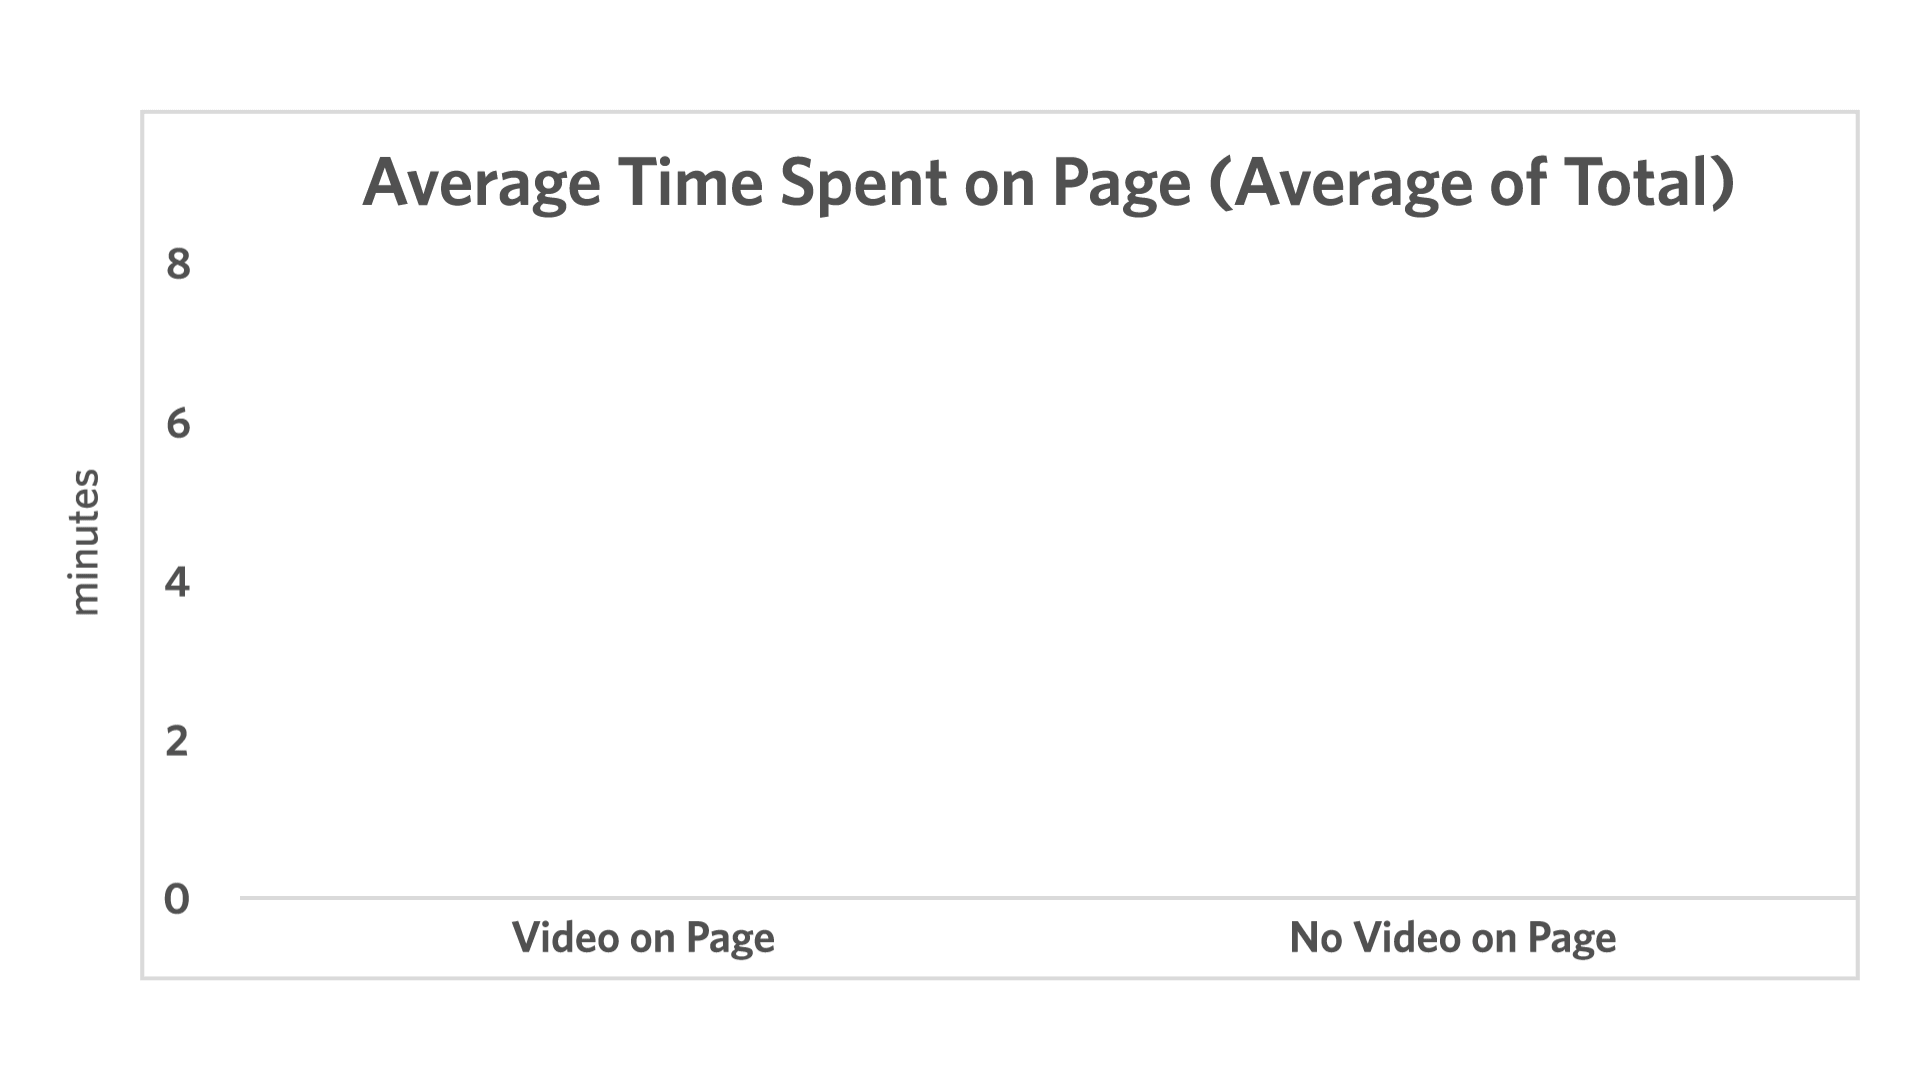 According to Wistia, "The average time spent on pages with video is 7 minutes and 21 seconds."